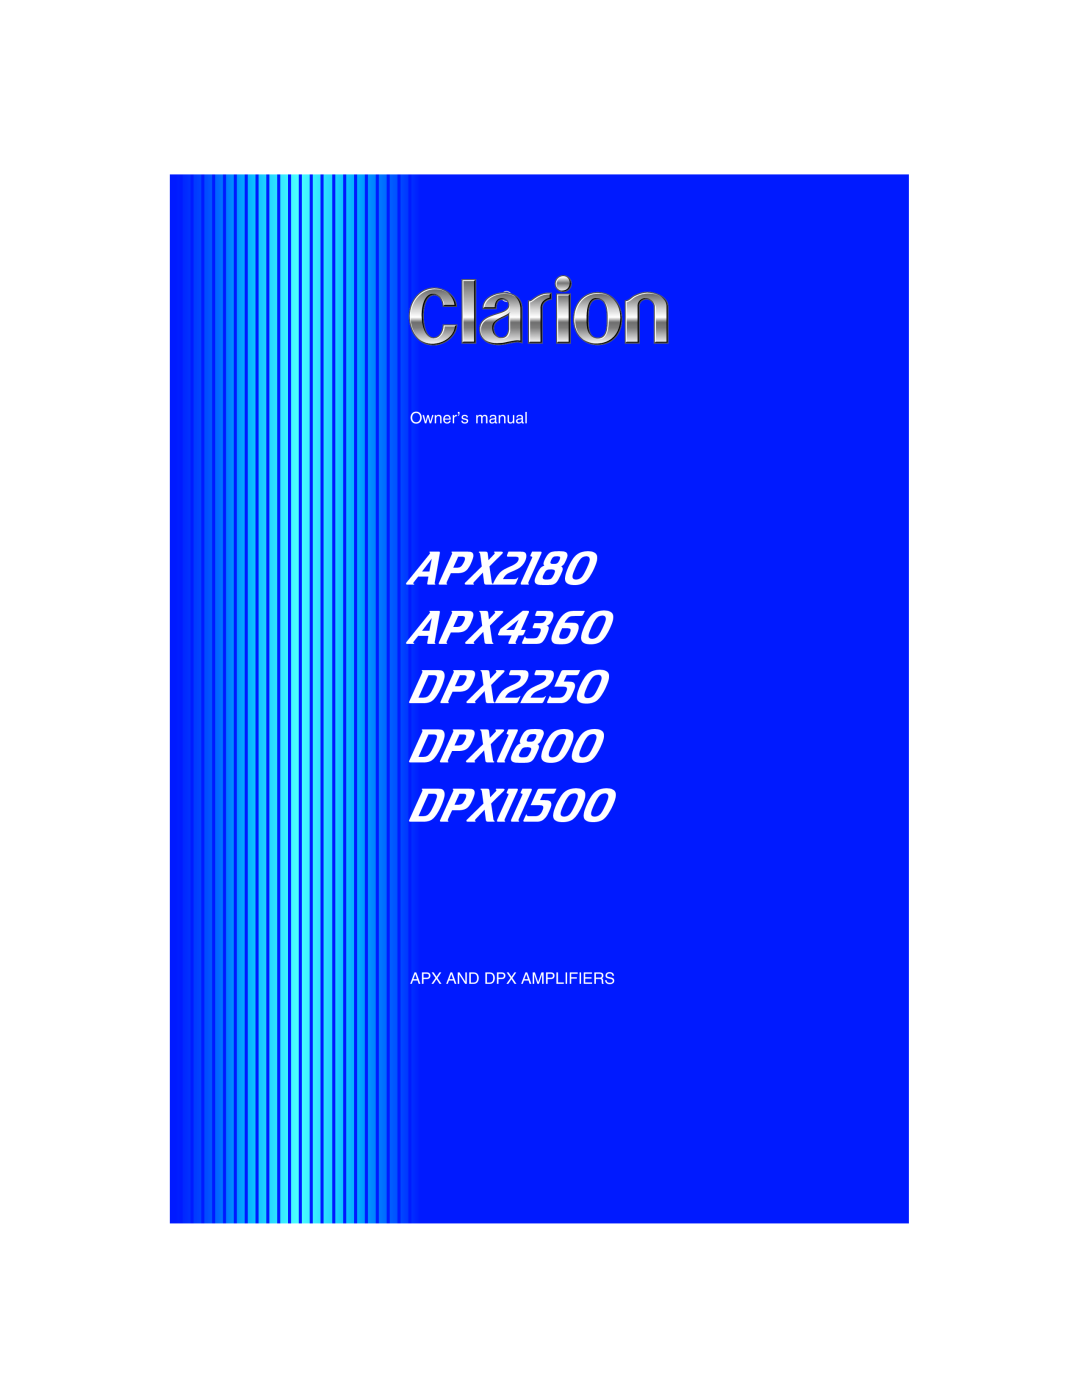 Clarion owner manual English, APX2180 APX4360 DPX2250 DPX1800 DPX11500, Apx And Dpx Amplifiers 